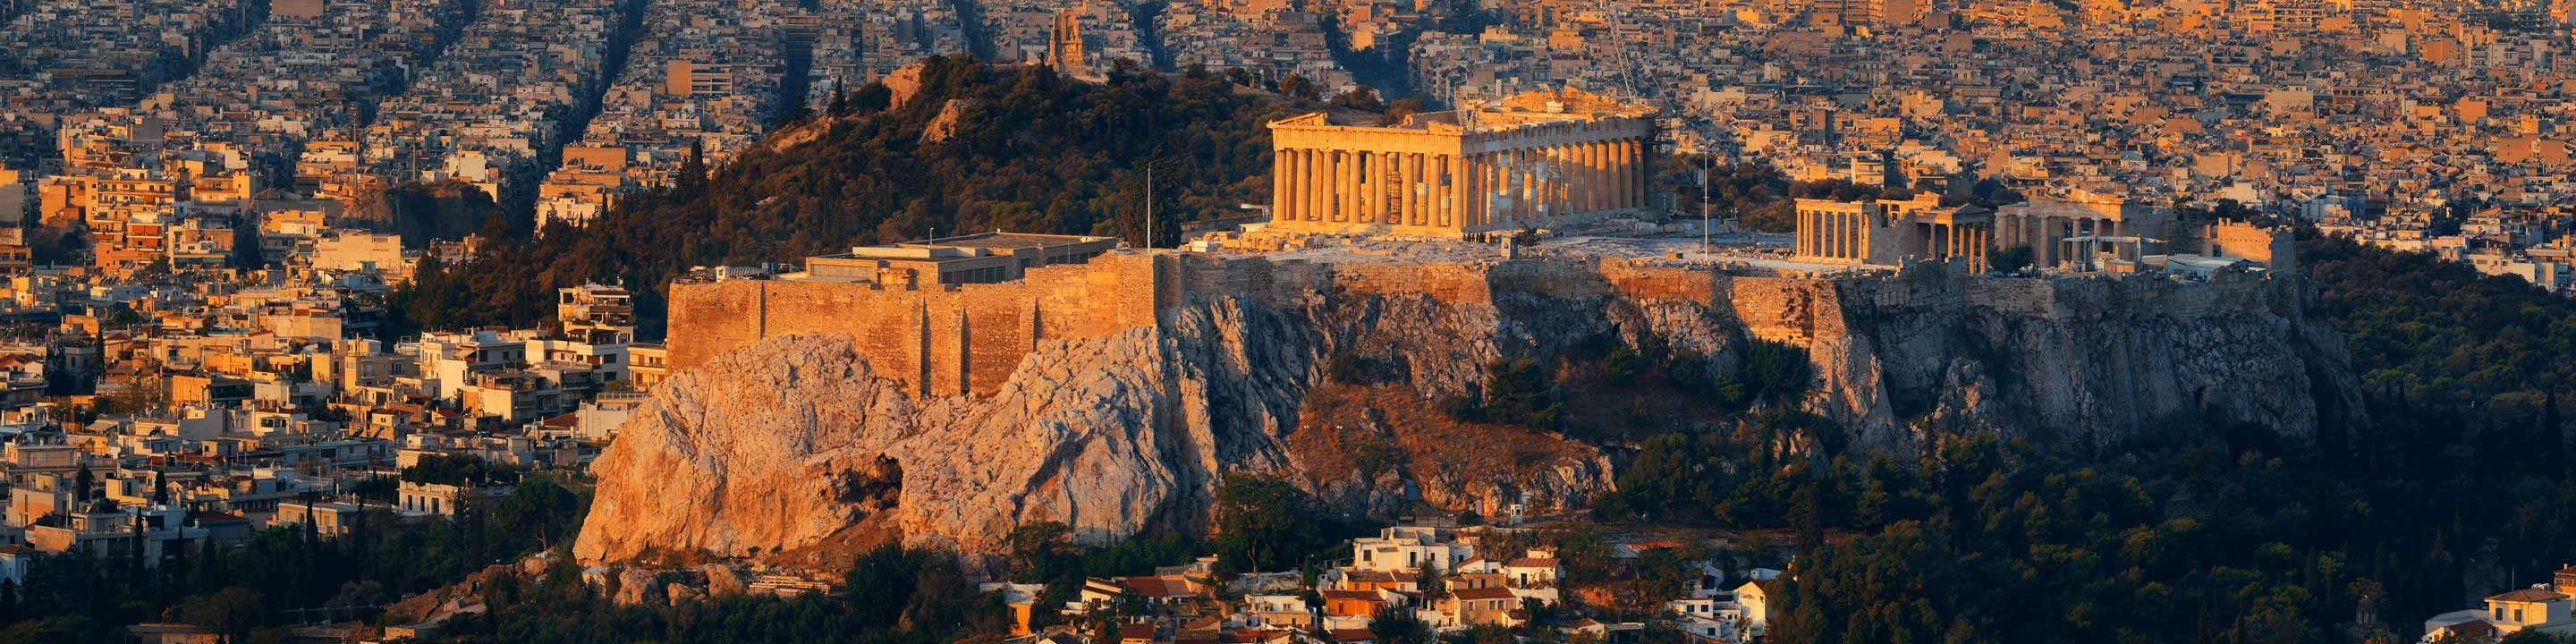 Acropolis Hill with Parthenon Temple in Athens